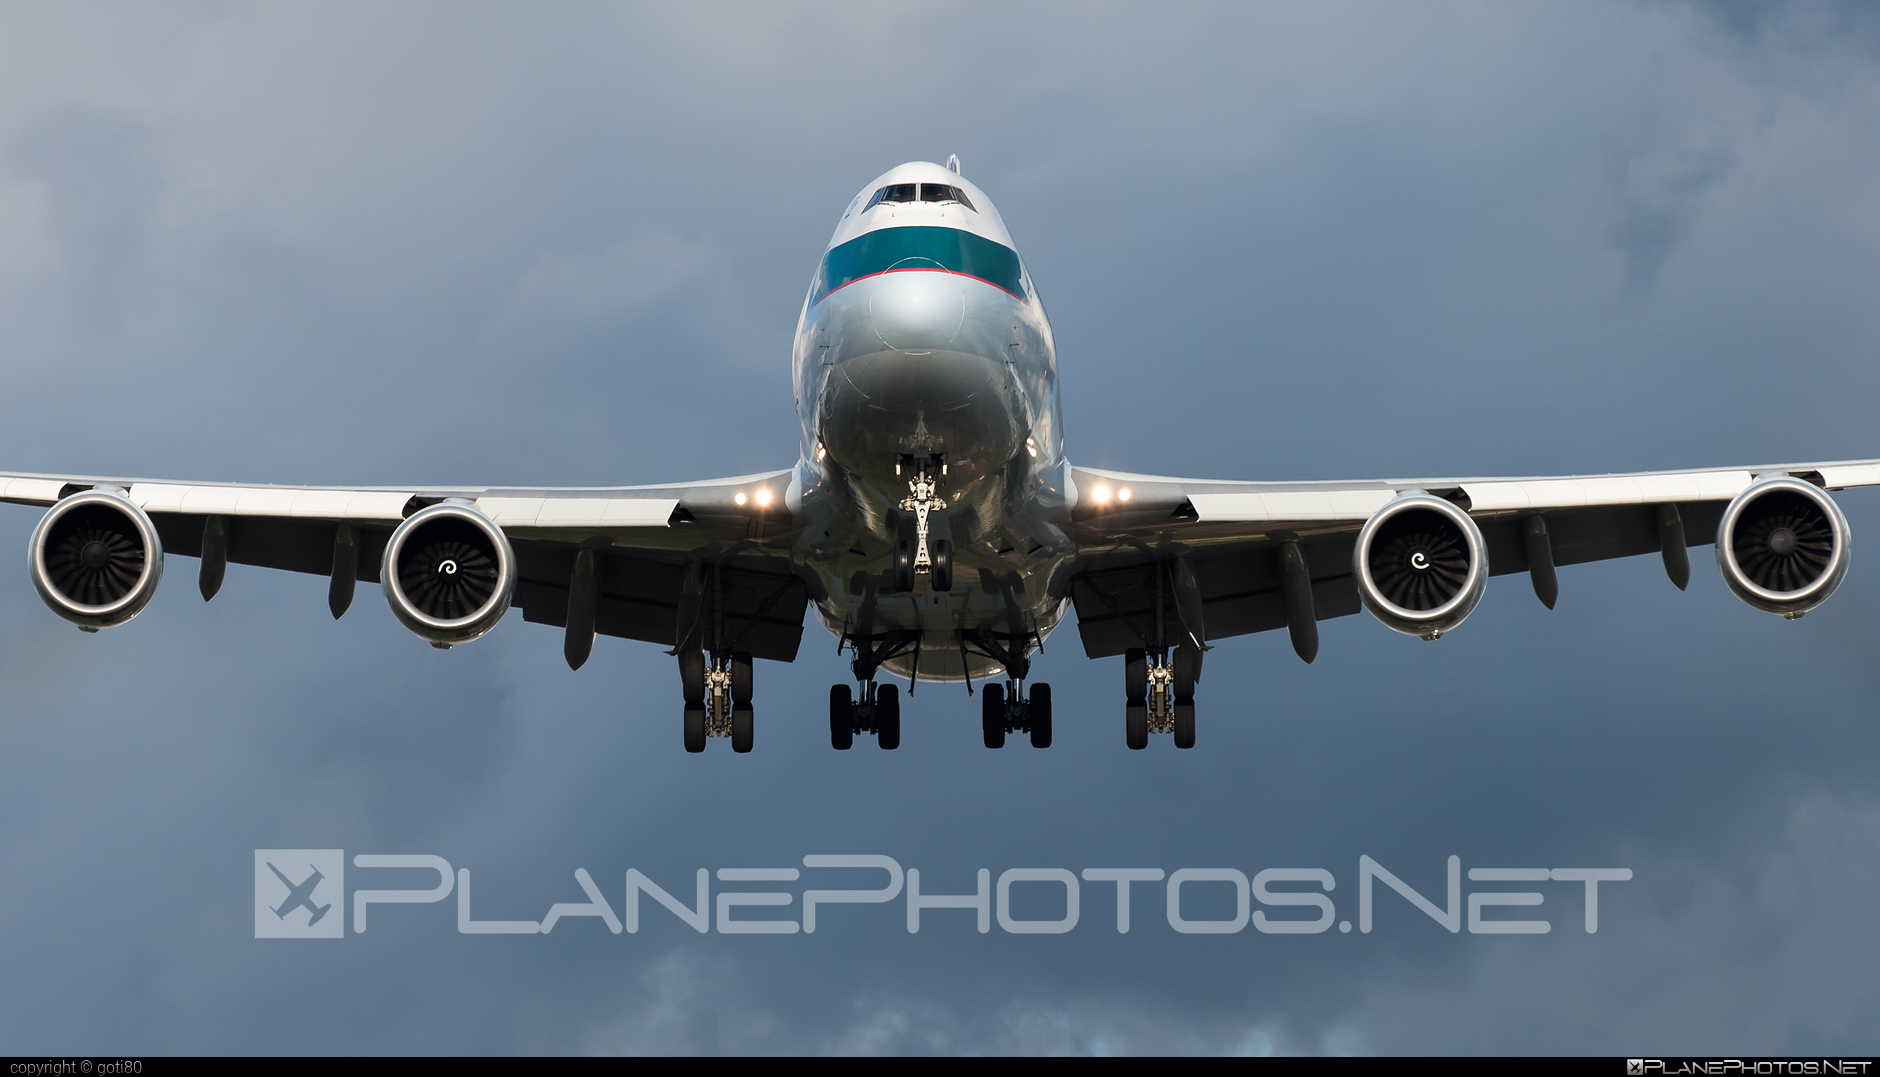 Boeing 747-8F - B-LJJ operated by Cathay Pacific Cargo #b747 #b747f #b747freighter #boeing #boeing747 #cathaypacific #cathaypacificcargo #jumbo